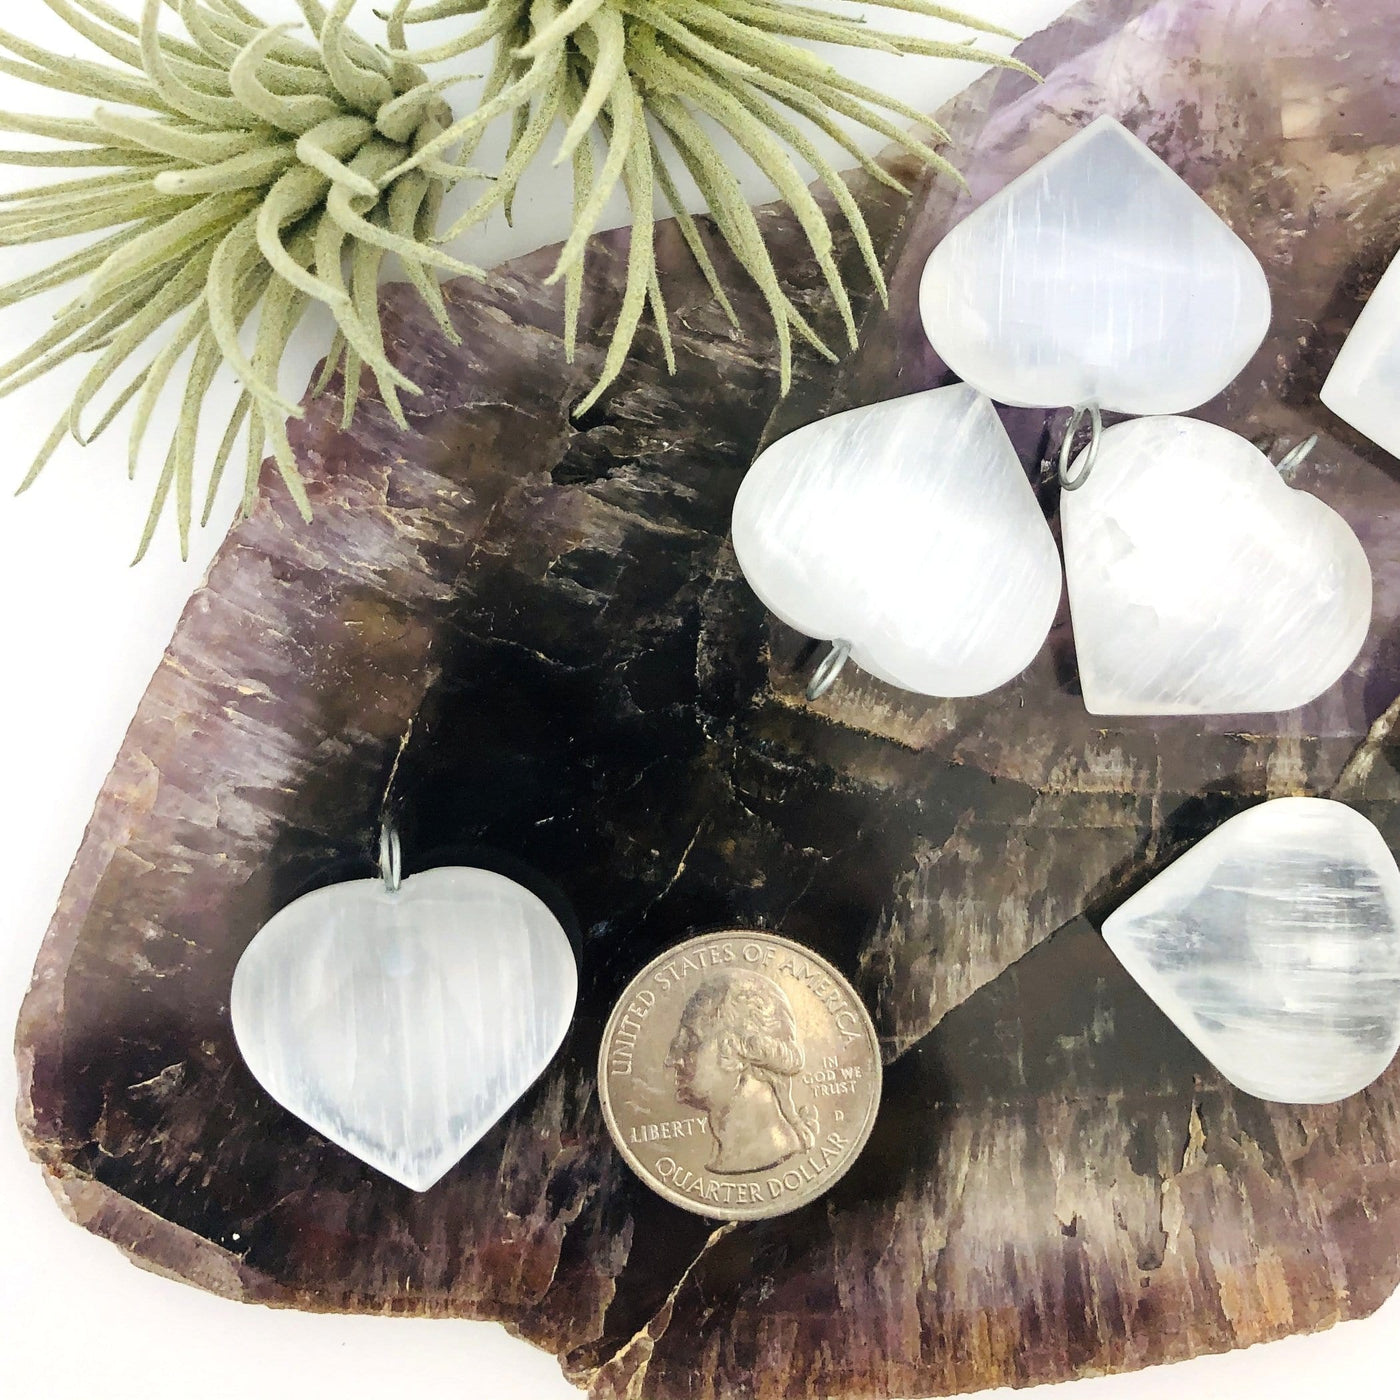 selenite heart pendant with quarter for size reference 